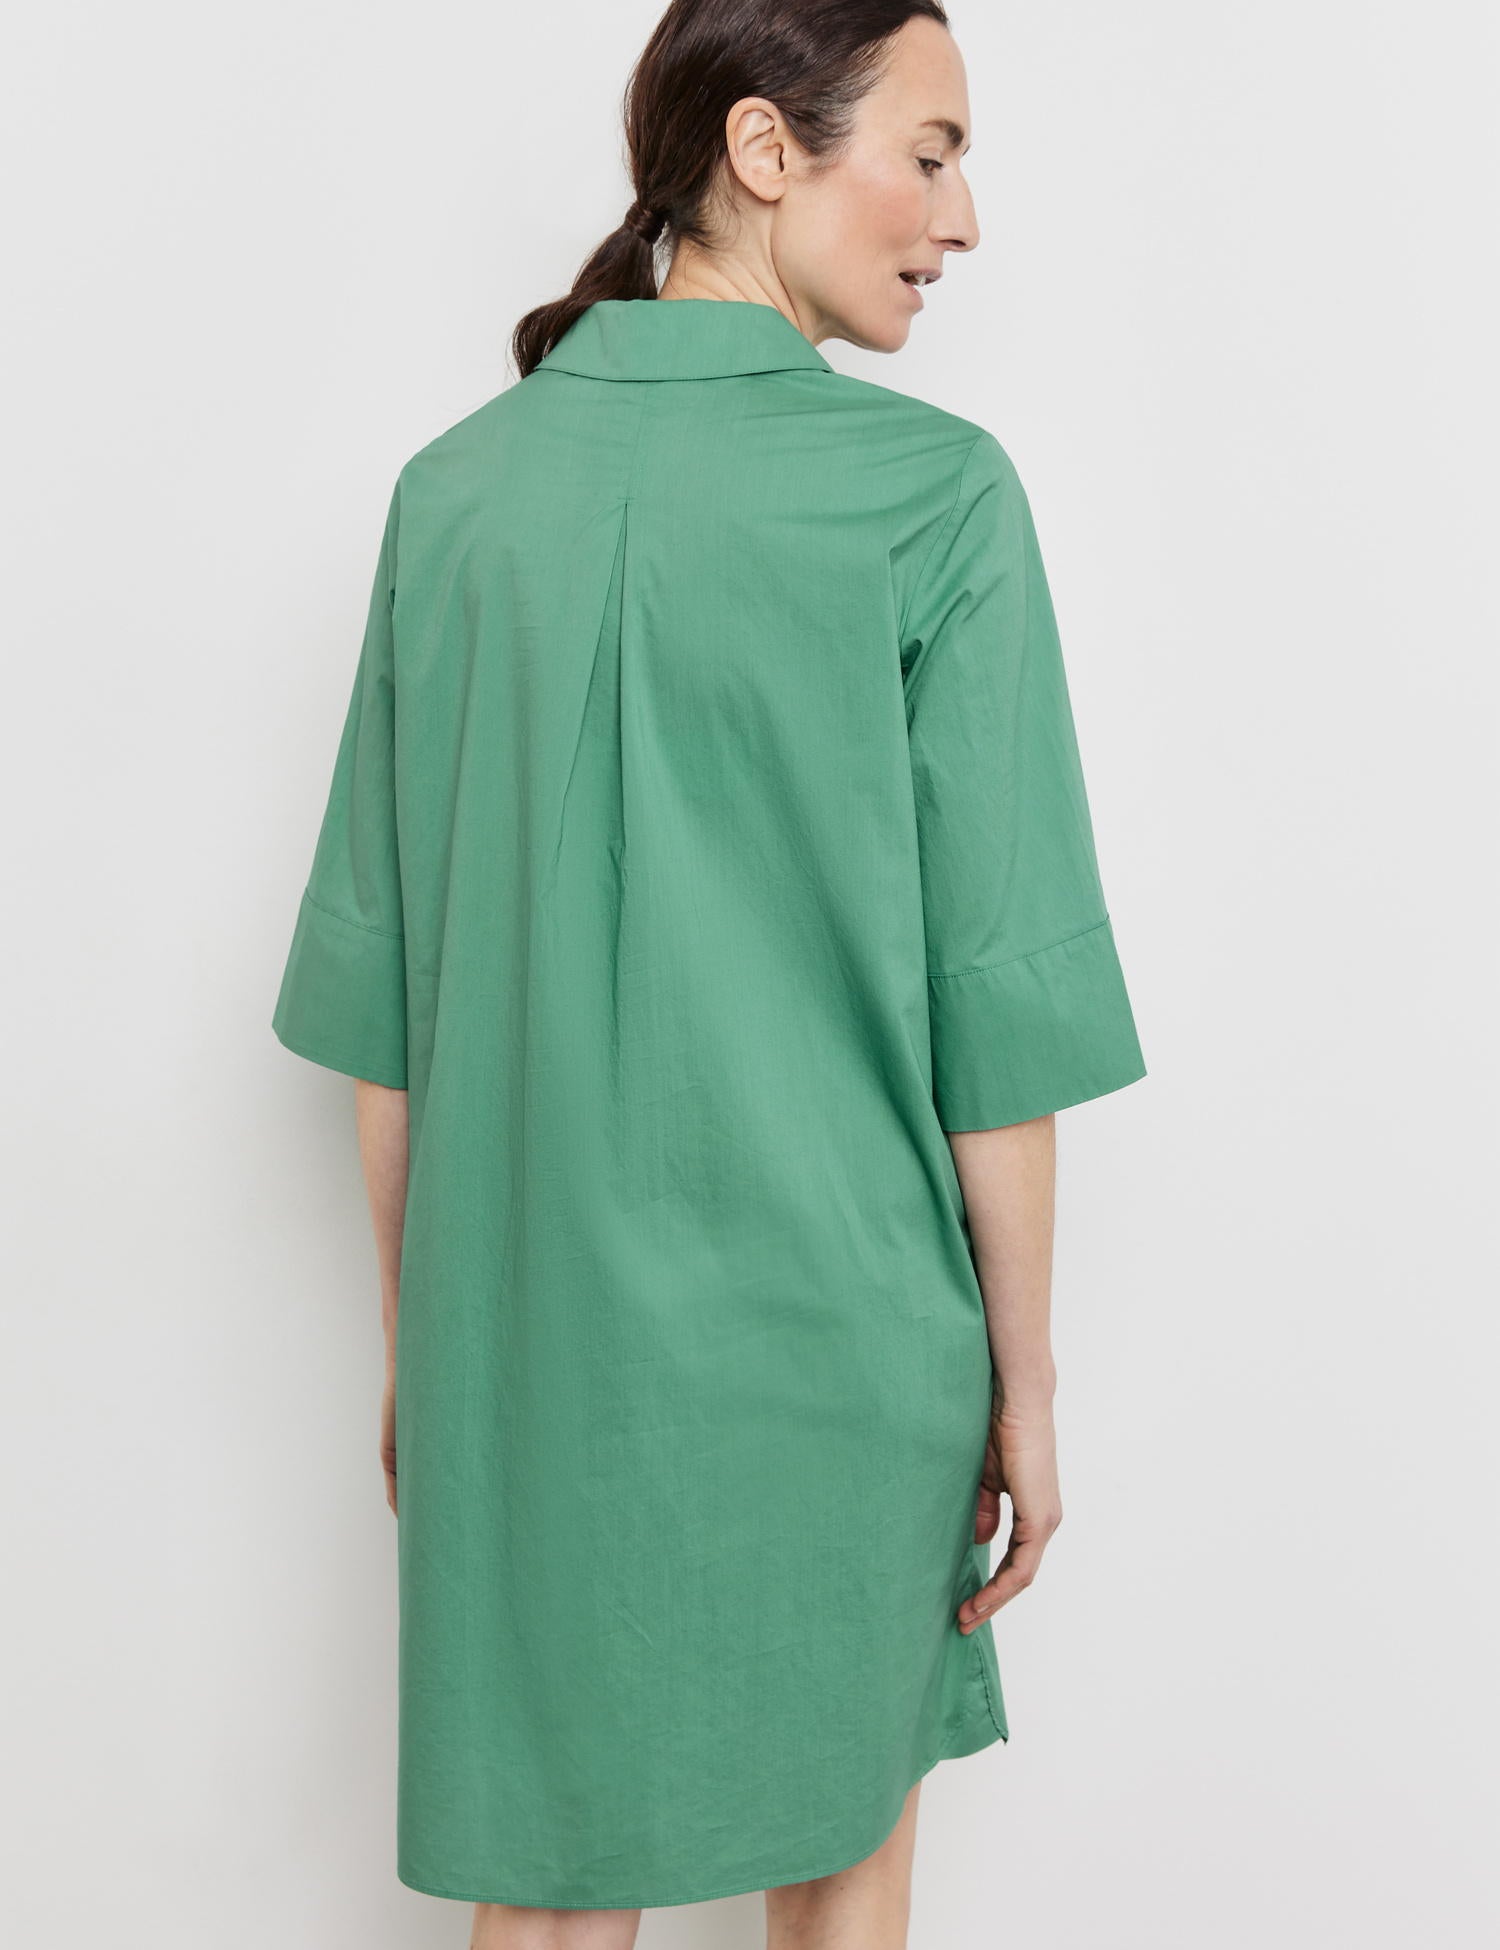 Casual Linen Dress With An Inverted Pleat_285045-66449_50946_06